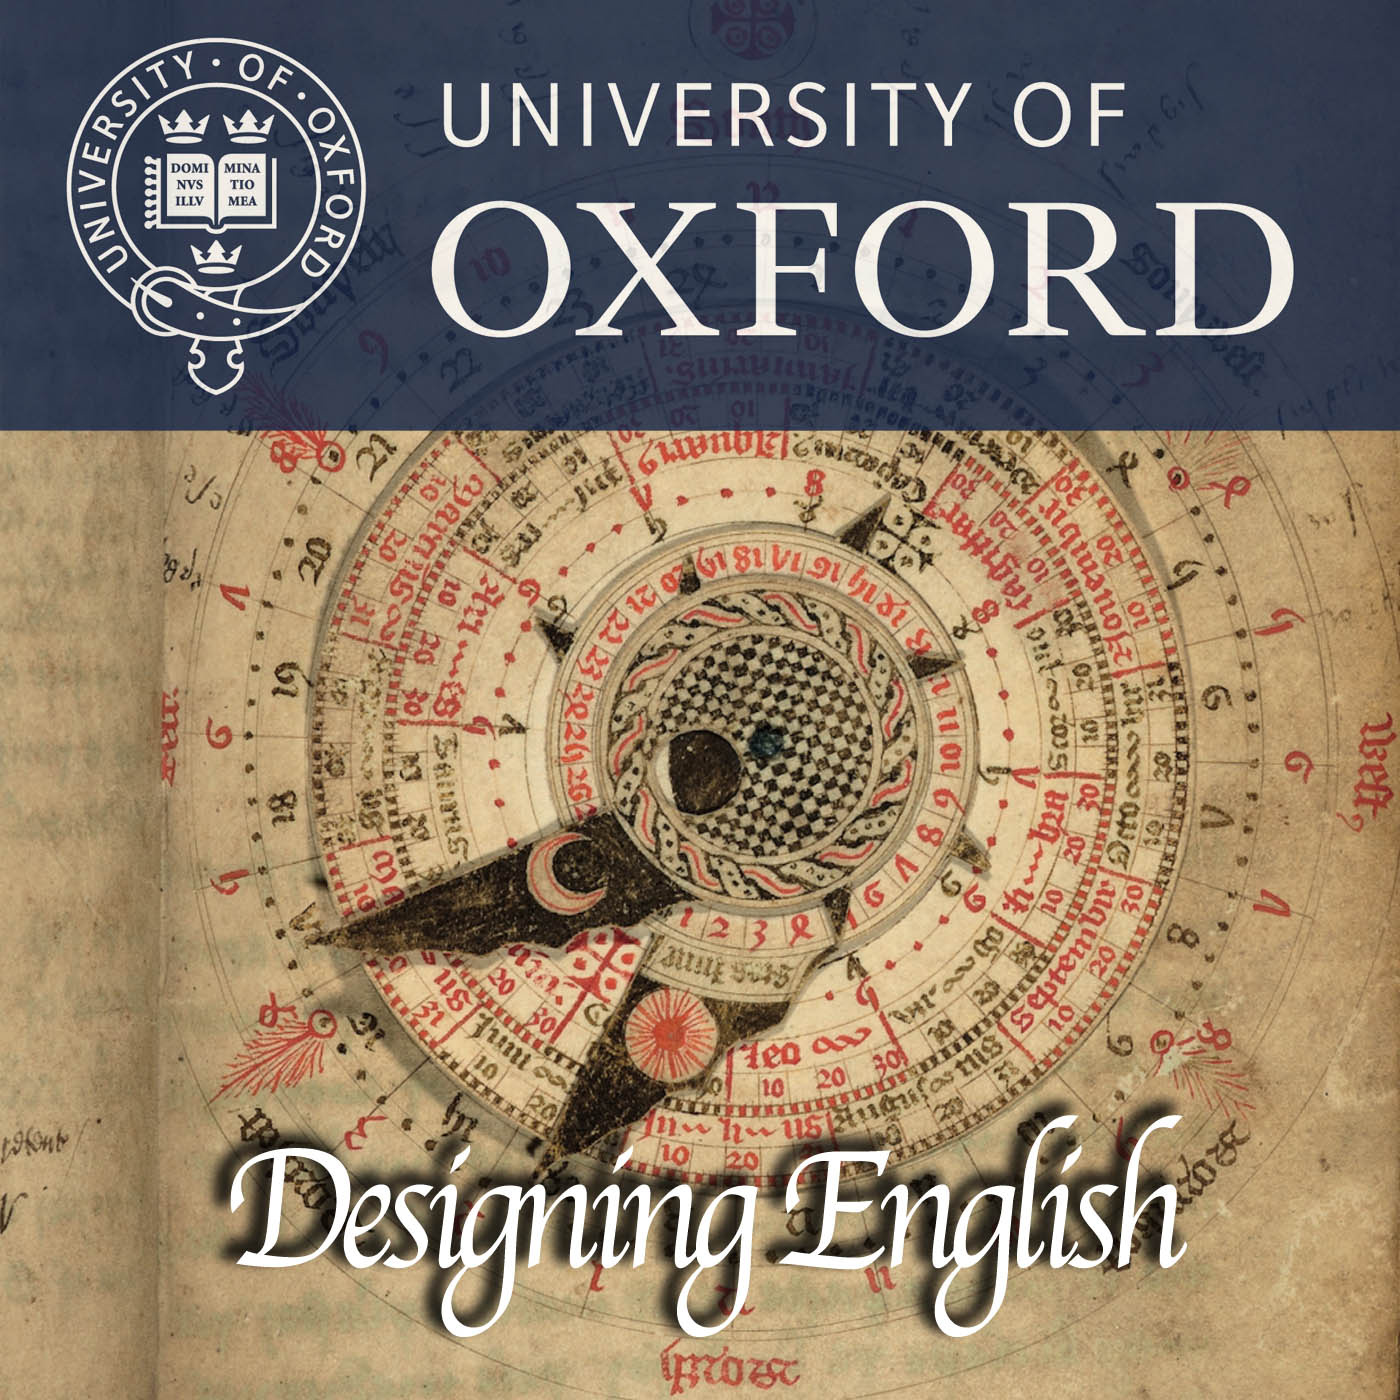 Designing English: Graphics on the medieval page